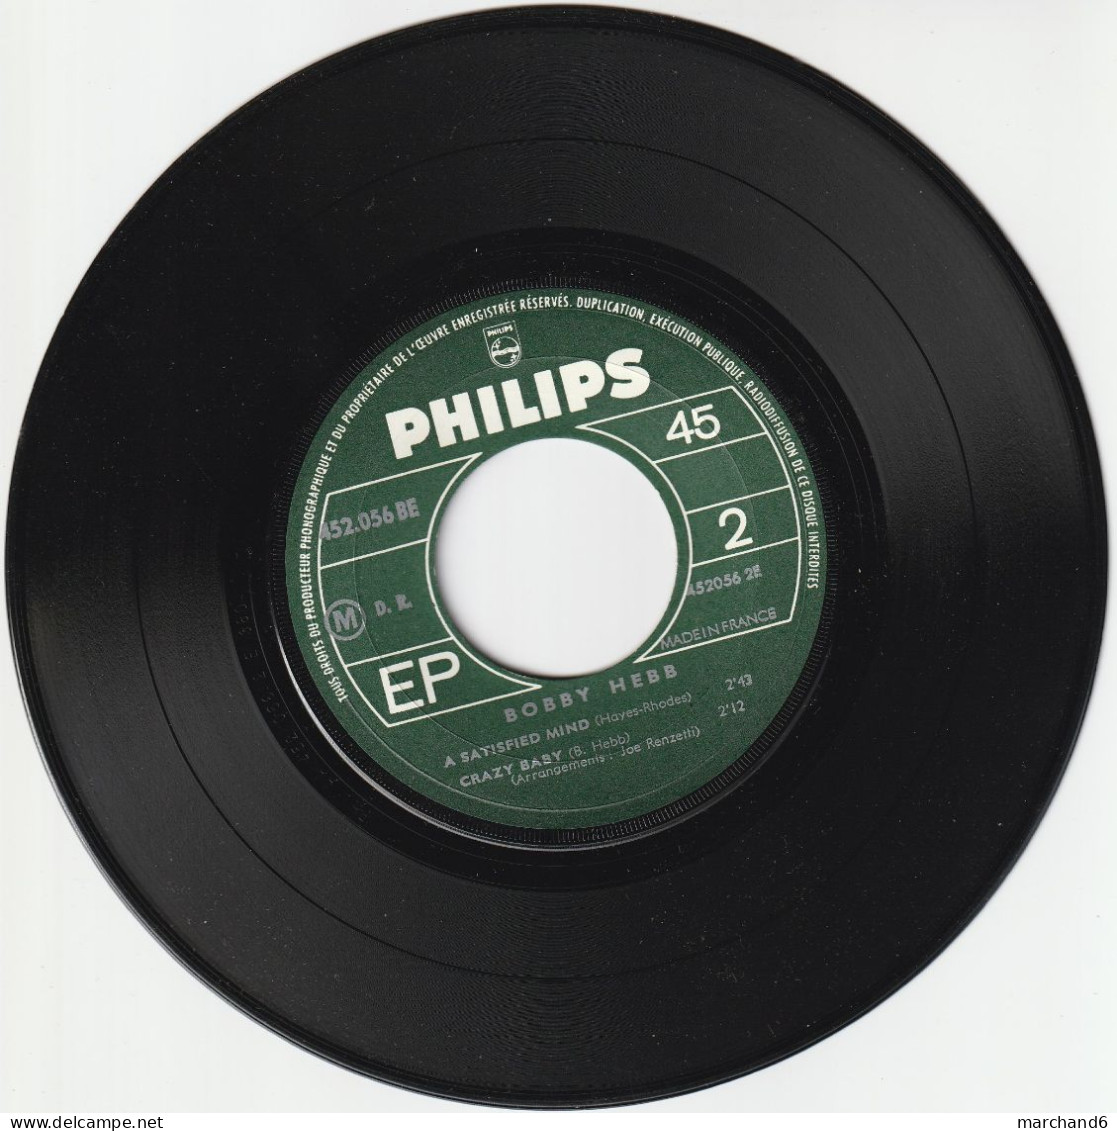 Bobby Hebb Philips 452 056 Sunny/yes Or No Or Maybe Not/a Satisfied Mind/crazy Baby - Andere - Engelstalig